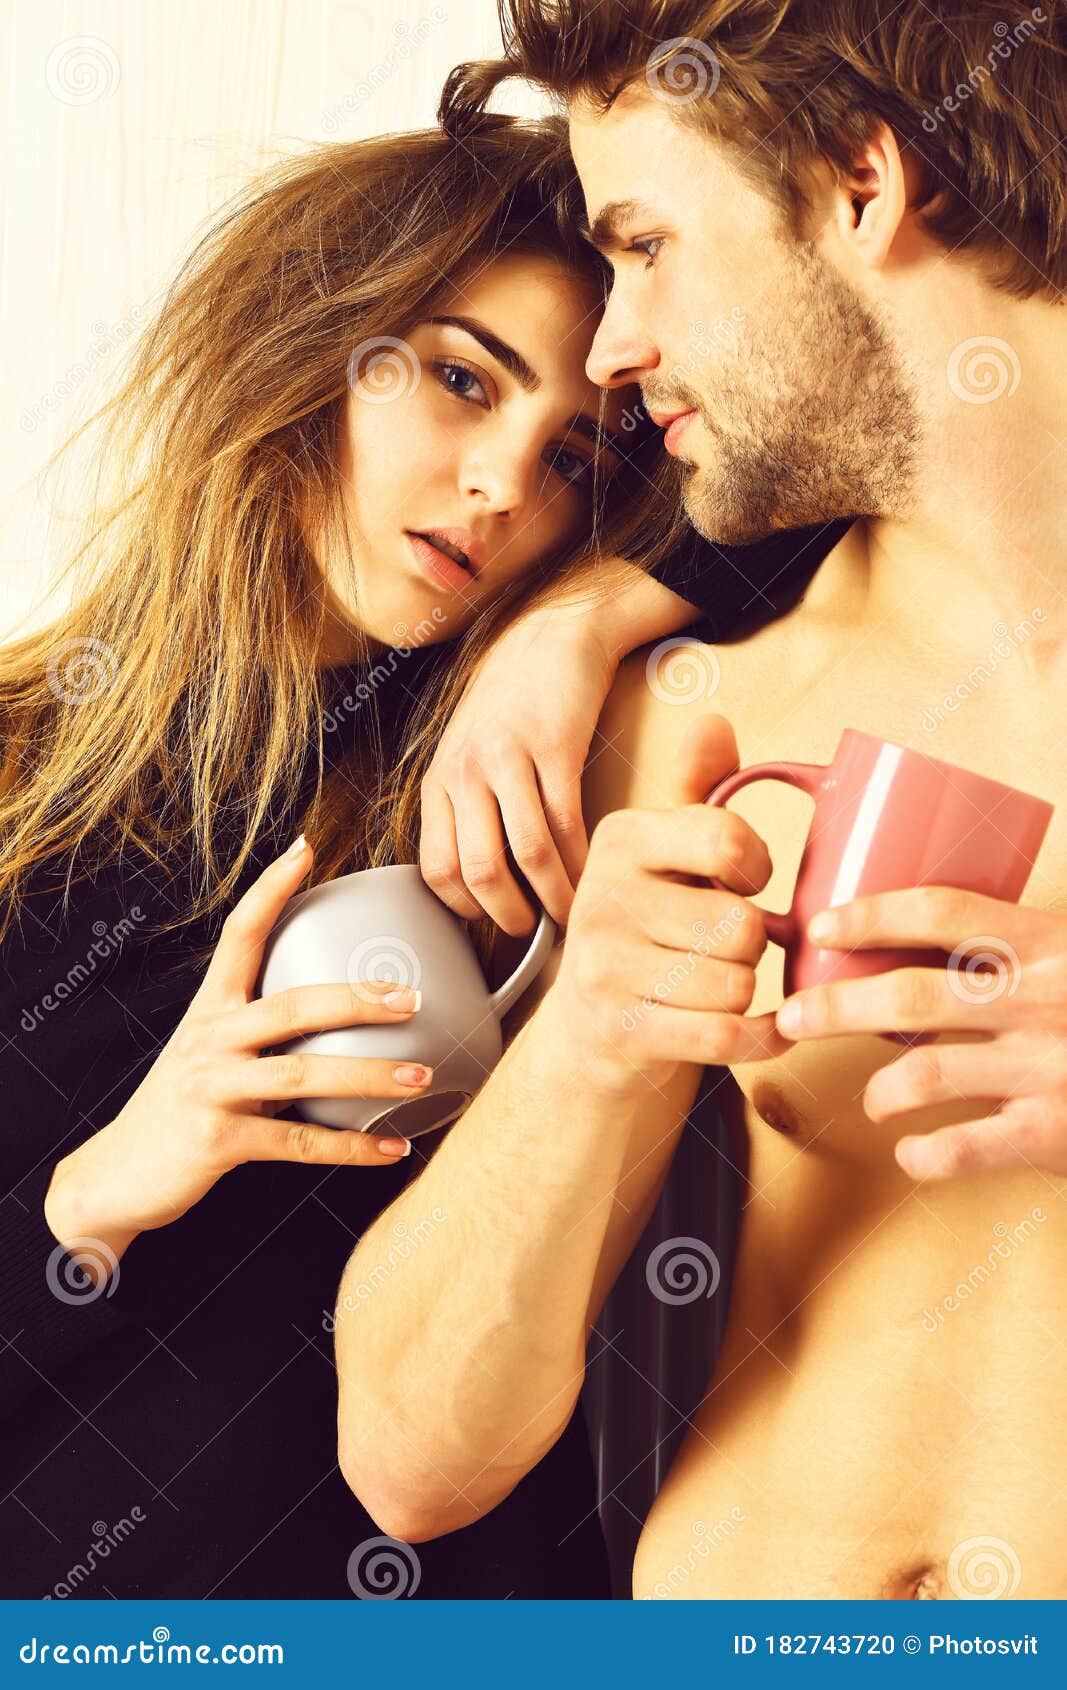 Muscle guy around sexy girls holding them Couple Of Bearded Man With Cute Girl Holding Cups Stock Photo Image Of Sexi Handsome 182743720